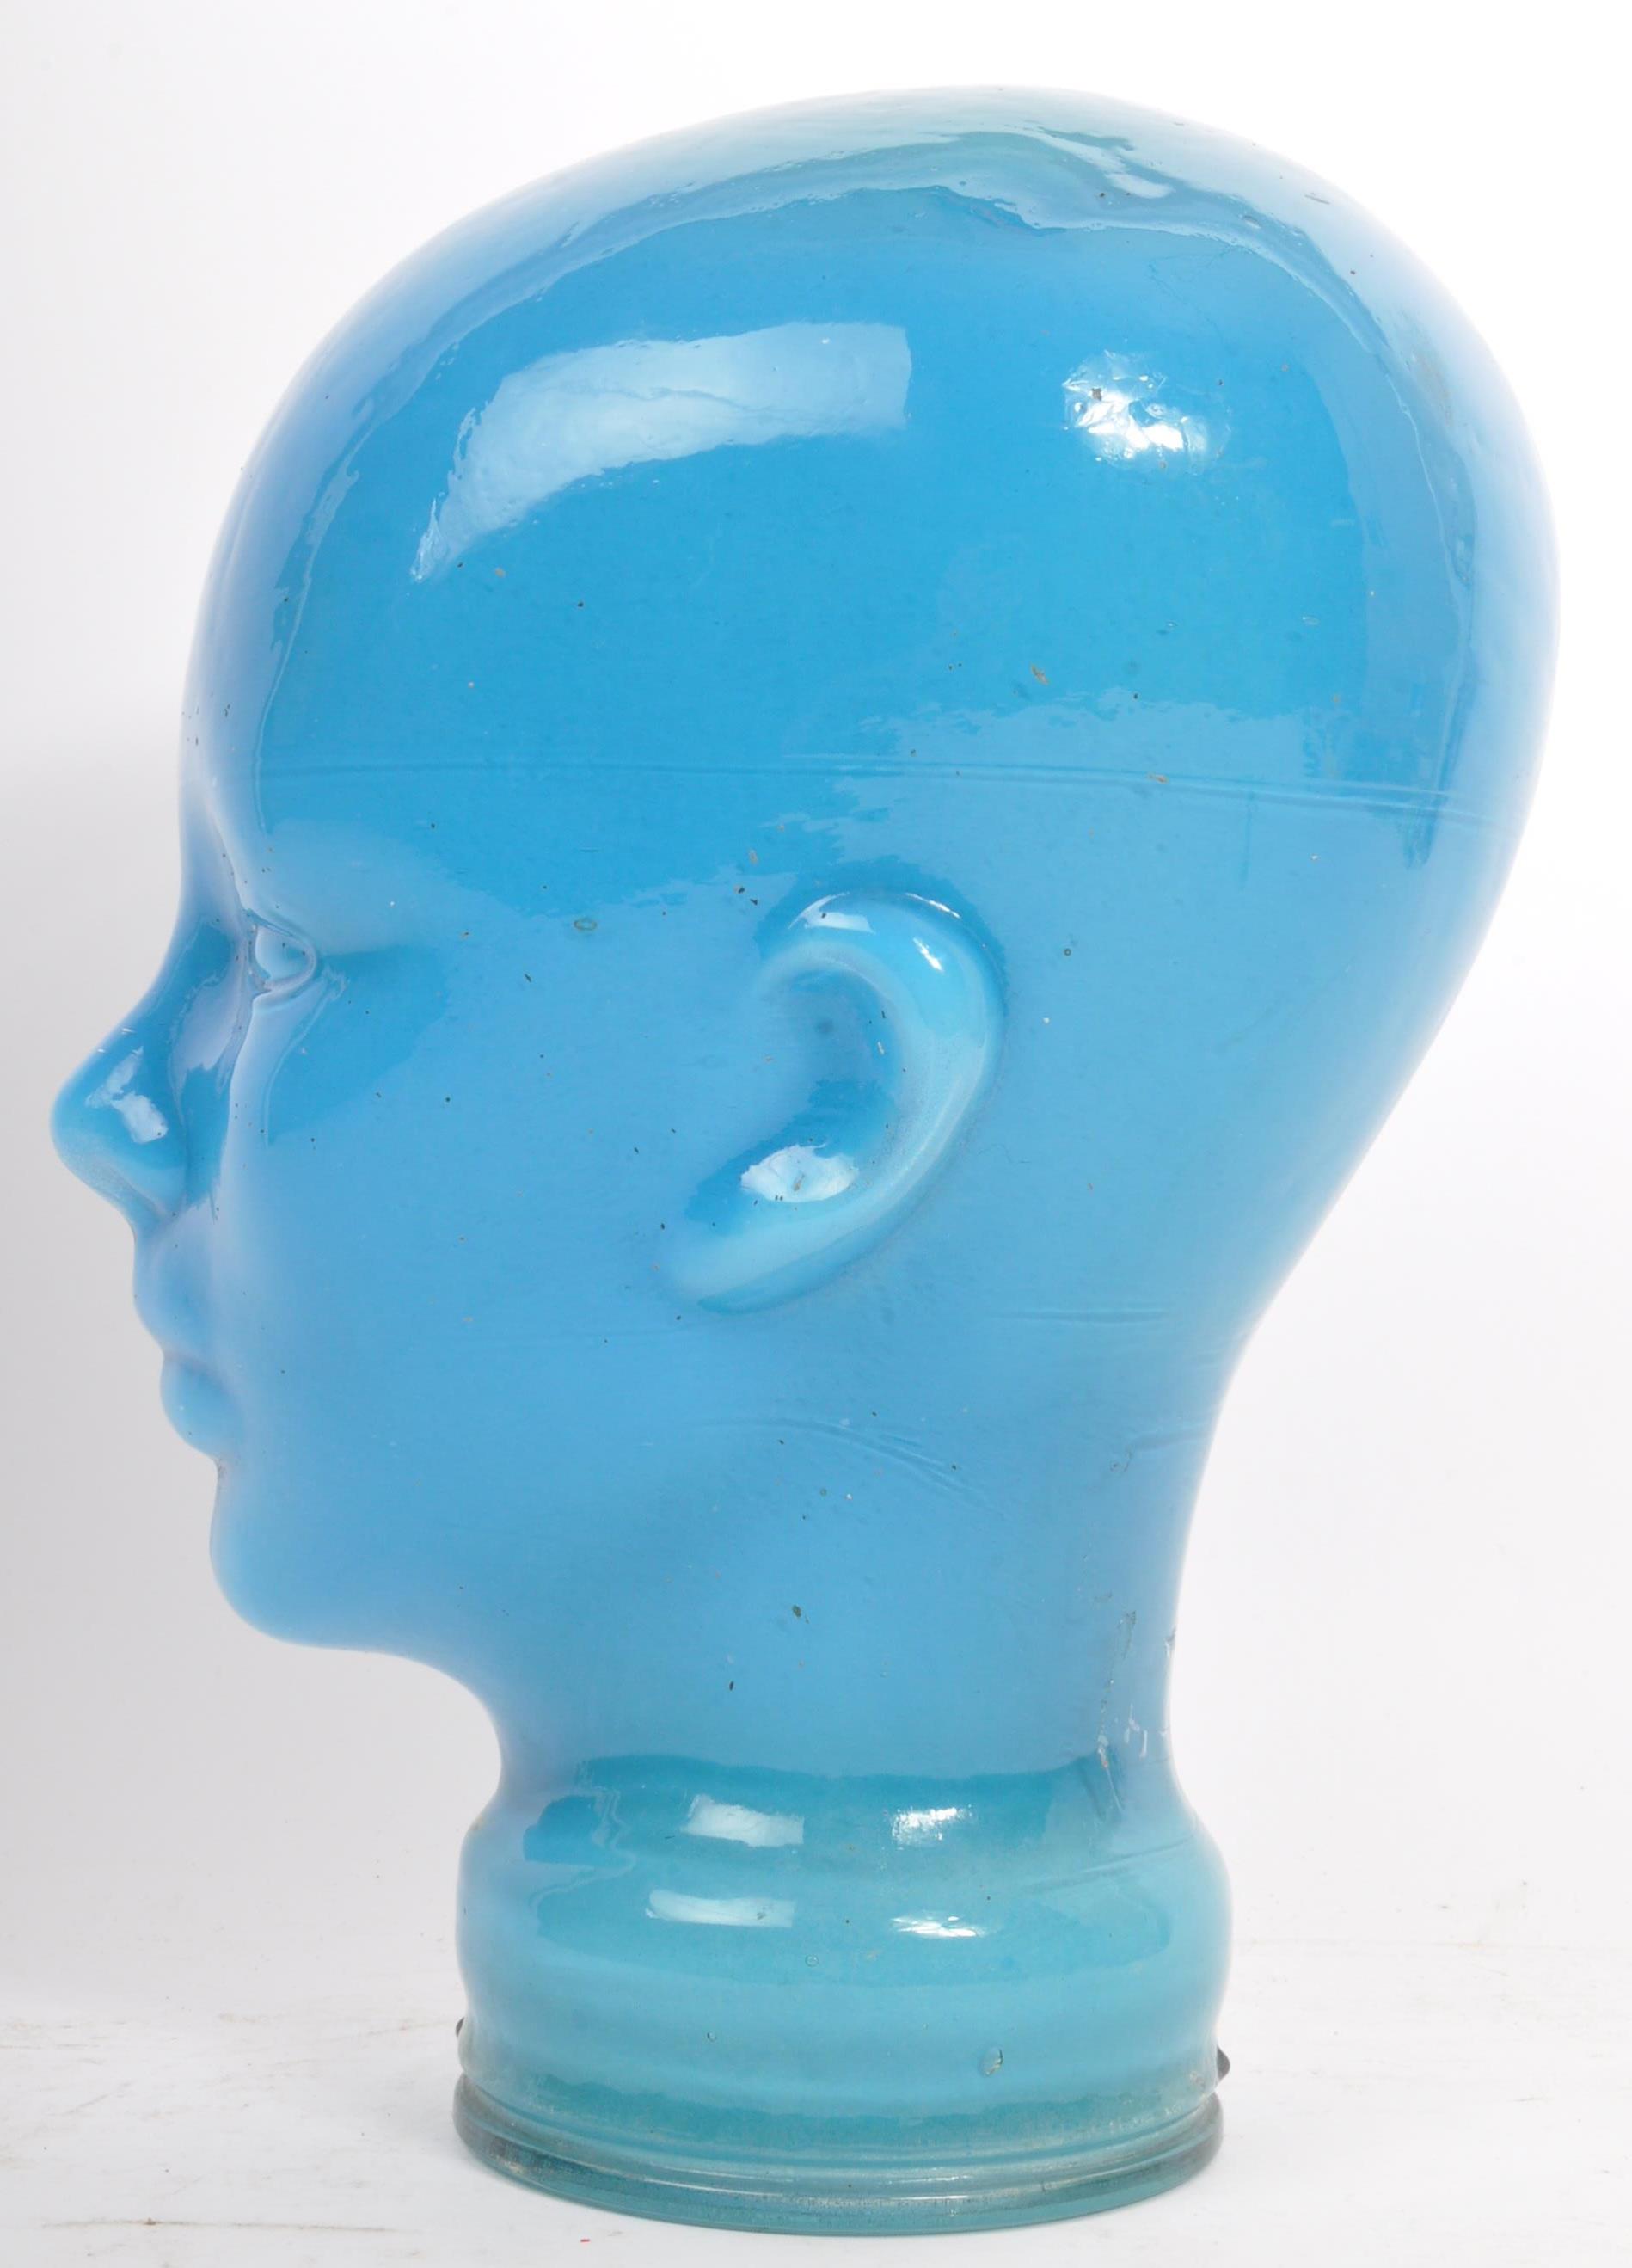 ART DECO STYLE GLASS MALE SHOP DISPLAY HEAD IN GLASS - Image 2 of 5